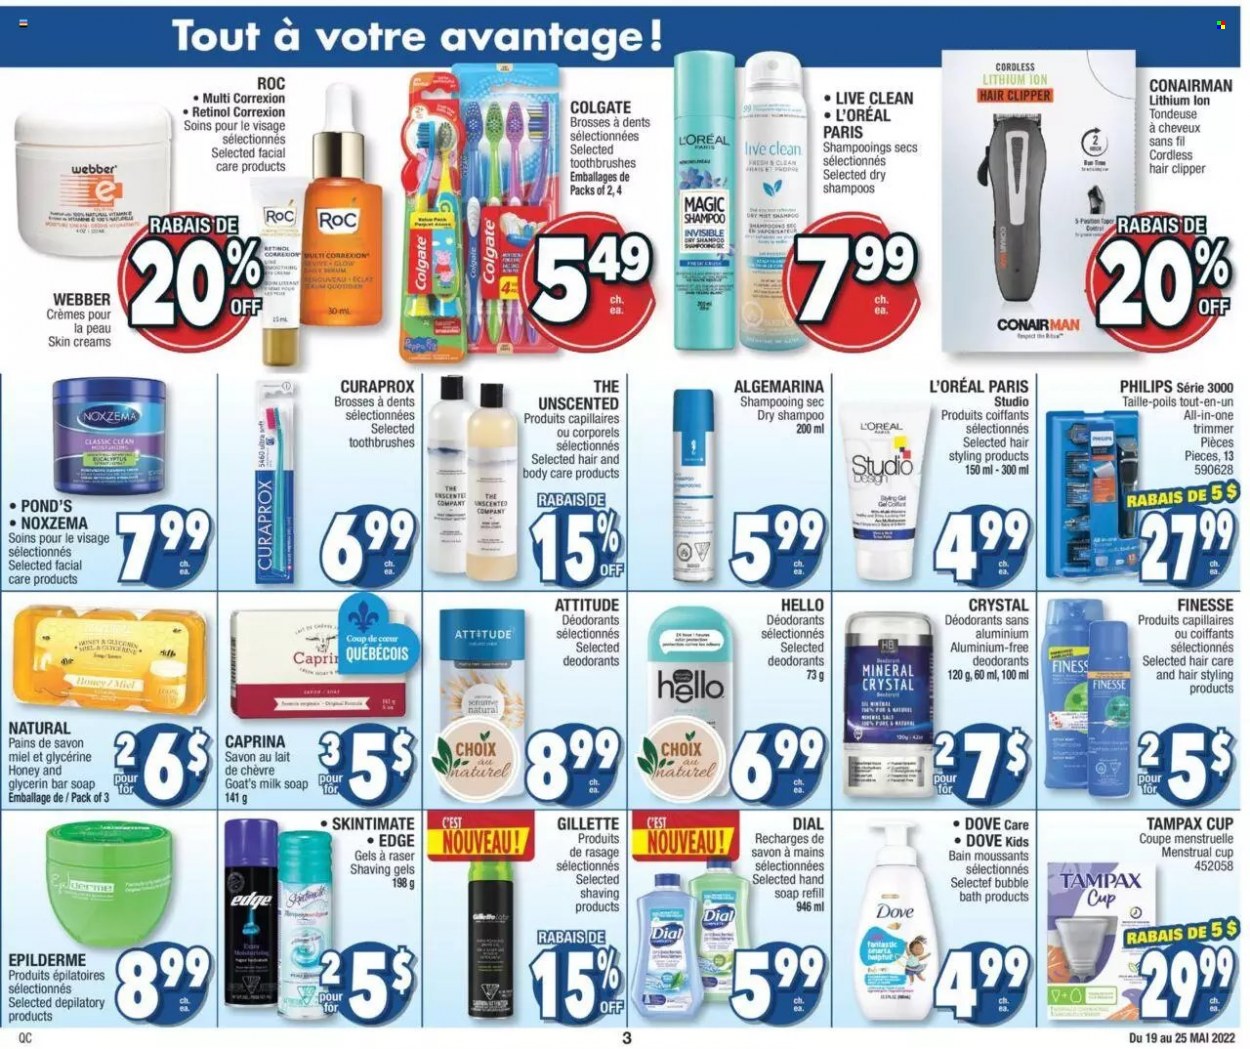 Jean Coutu flyer  - May 19, 2022 - May 25, 2022.